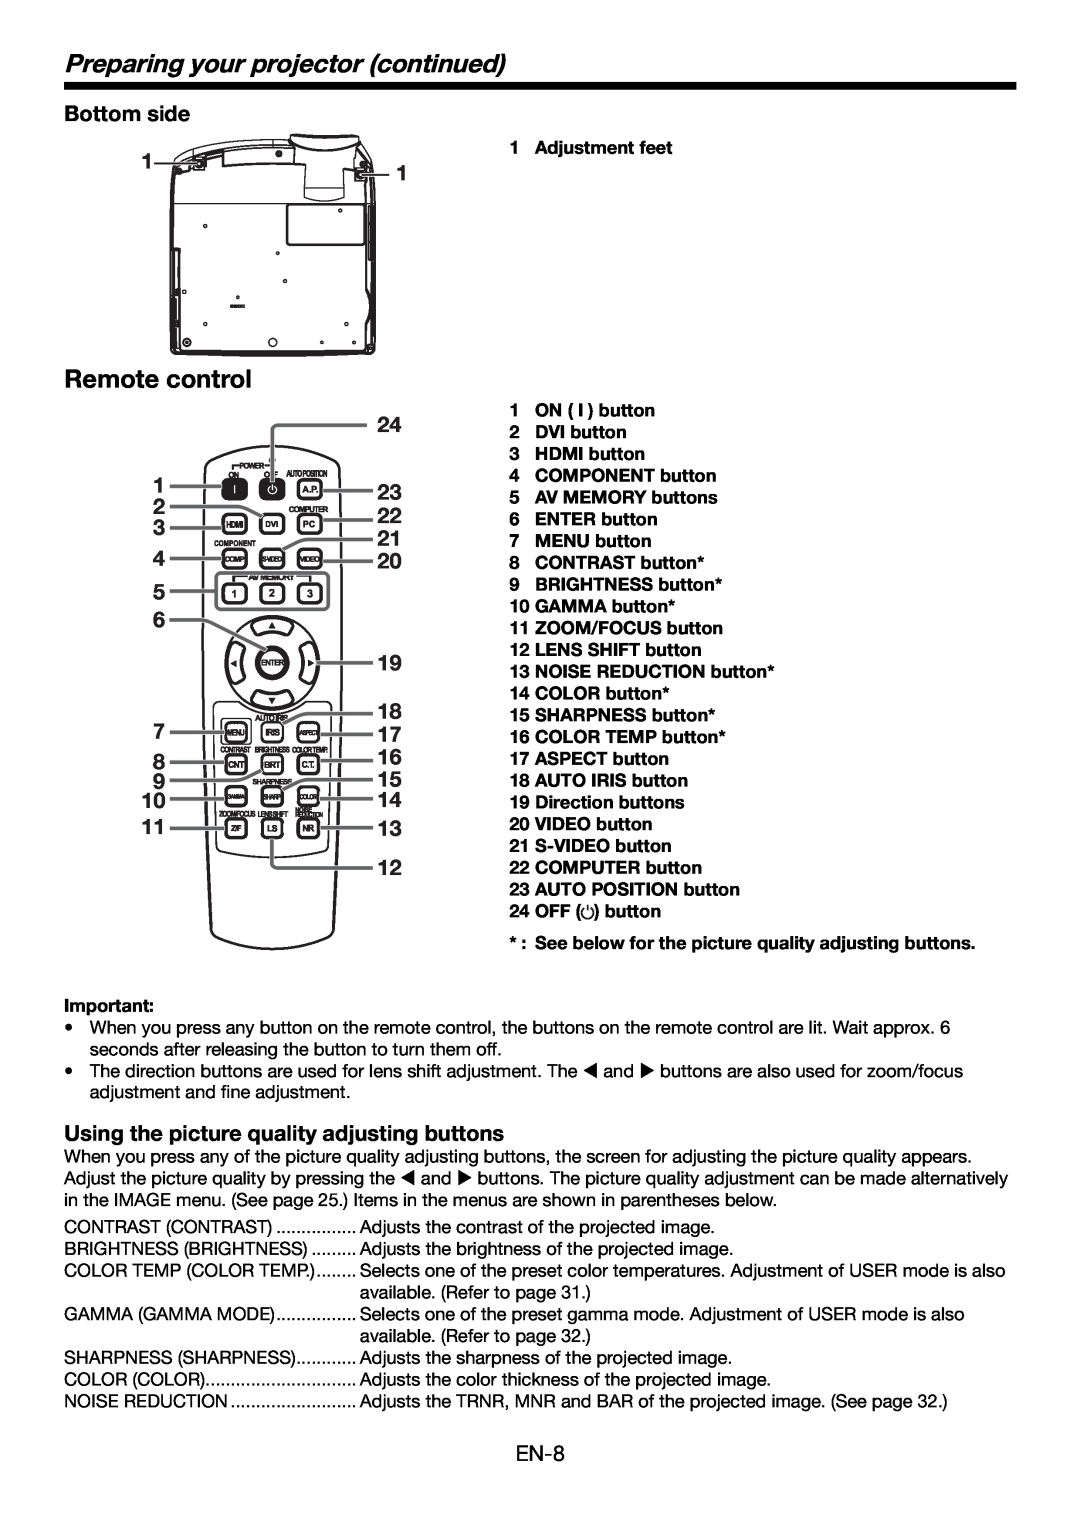 Mitsubishi Electronics HC4900 Remote control, Bottom side, Using the picture quality adjusting buttons, Adjustment feet 